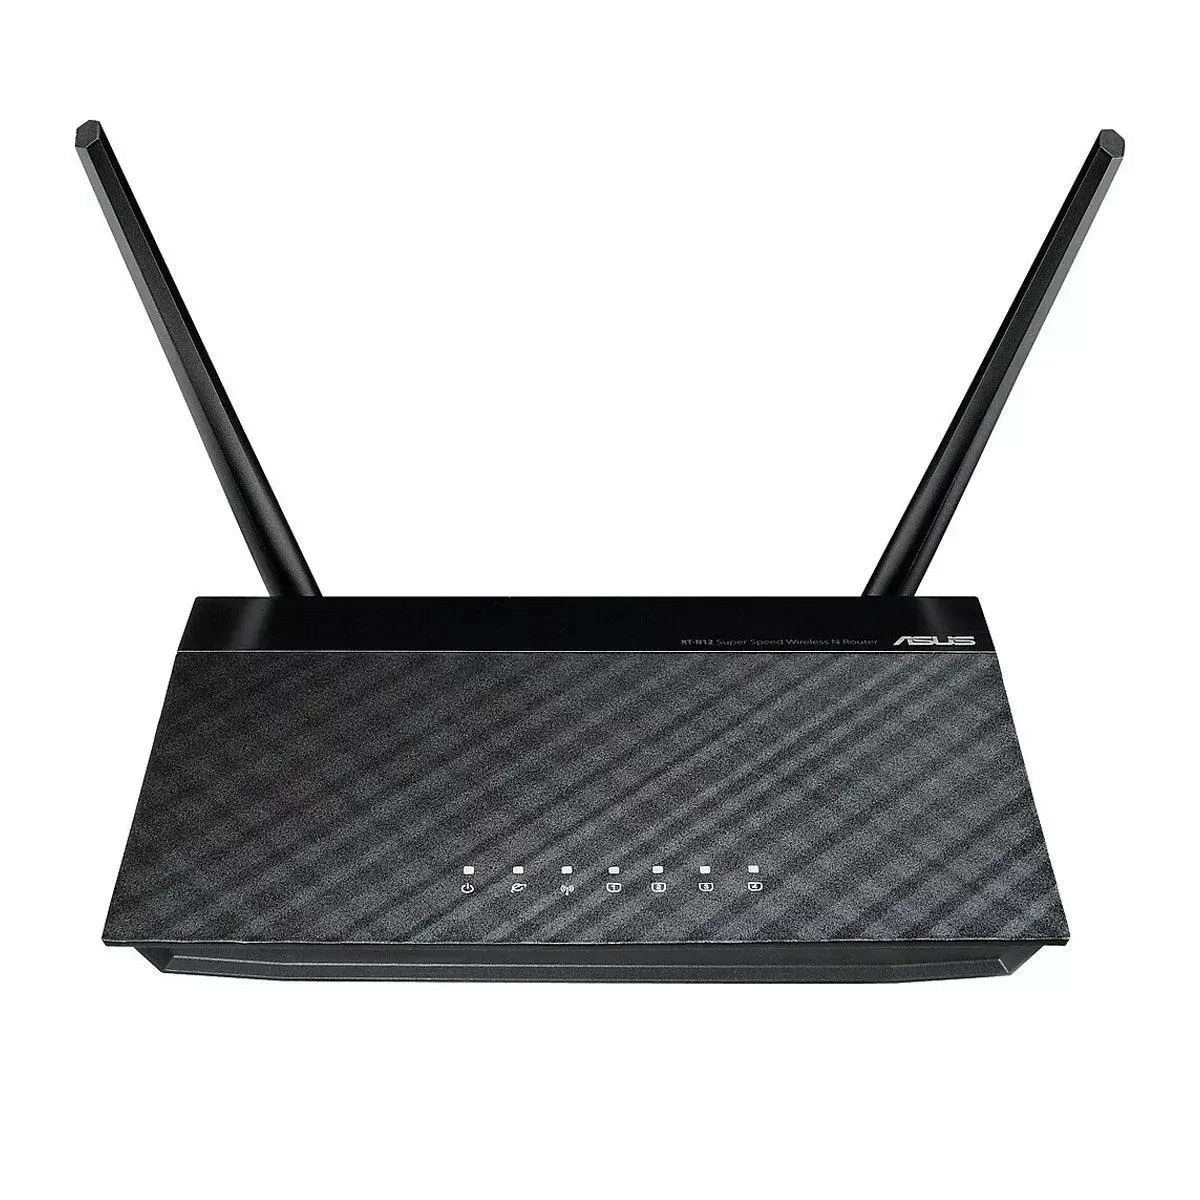 ASUS RT-N12+ - DSL Router